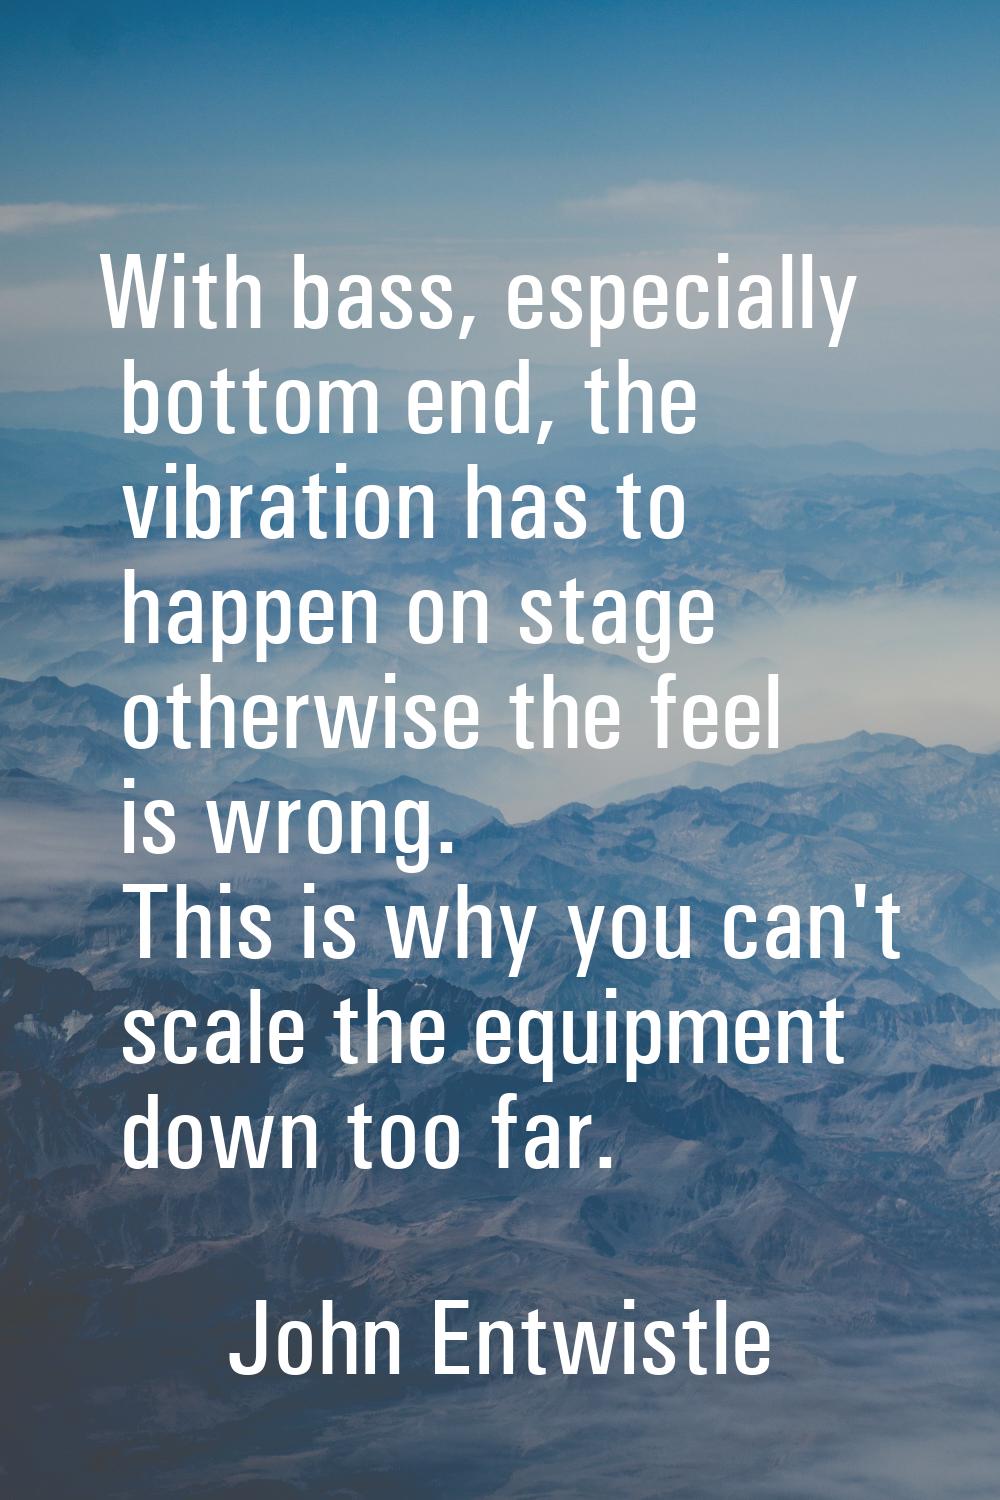 With bass, especially bottom end, the vibration has to happen on stage otherwise the feel is wrong.